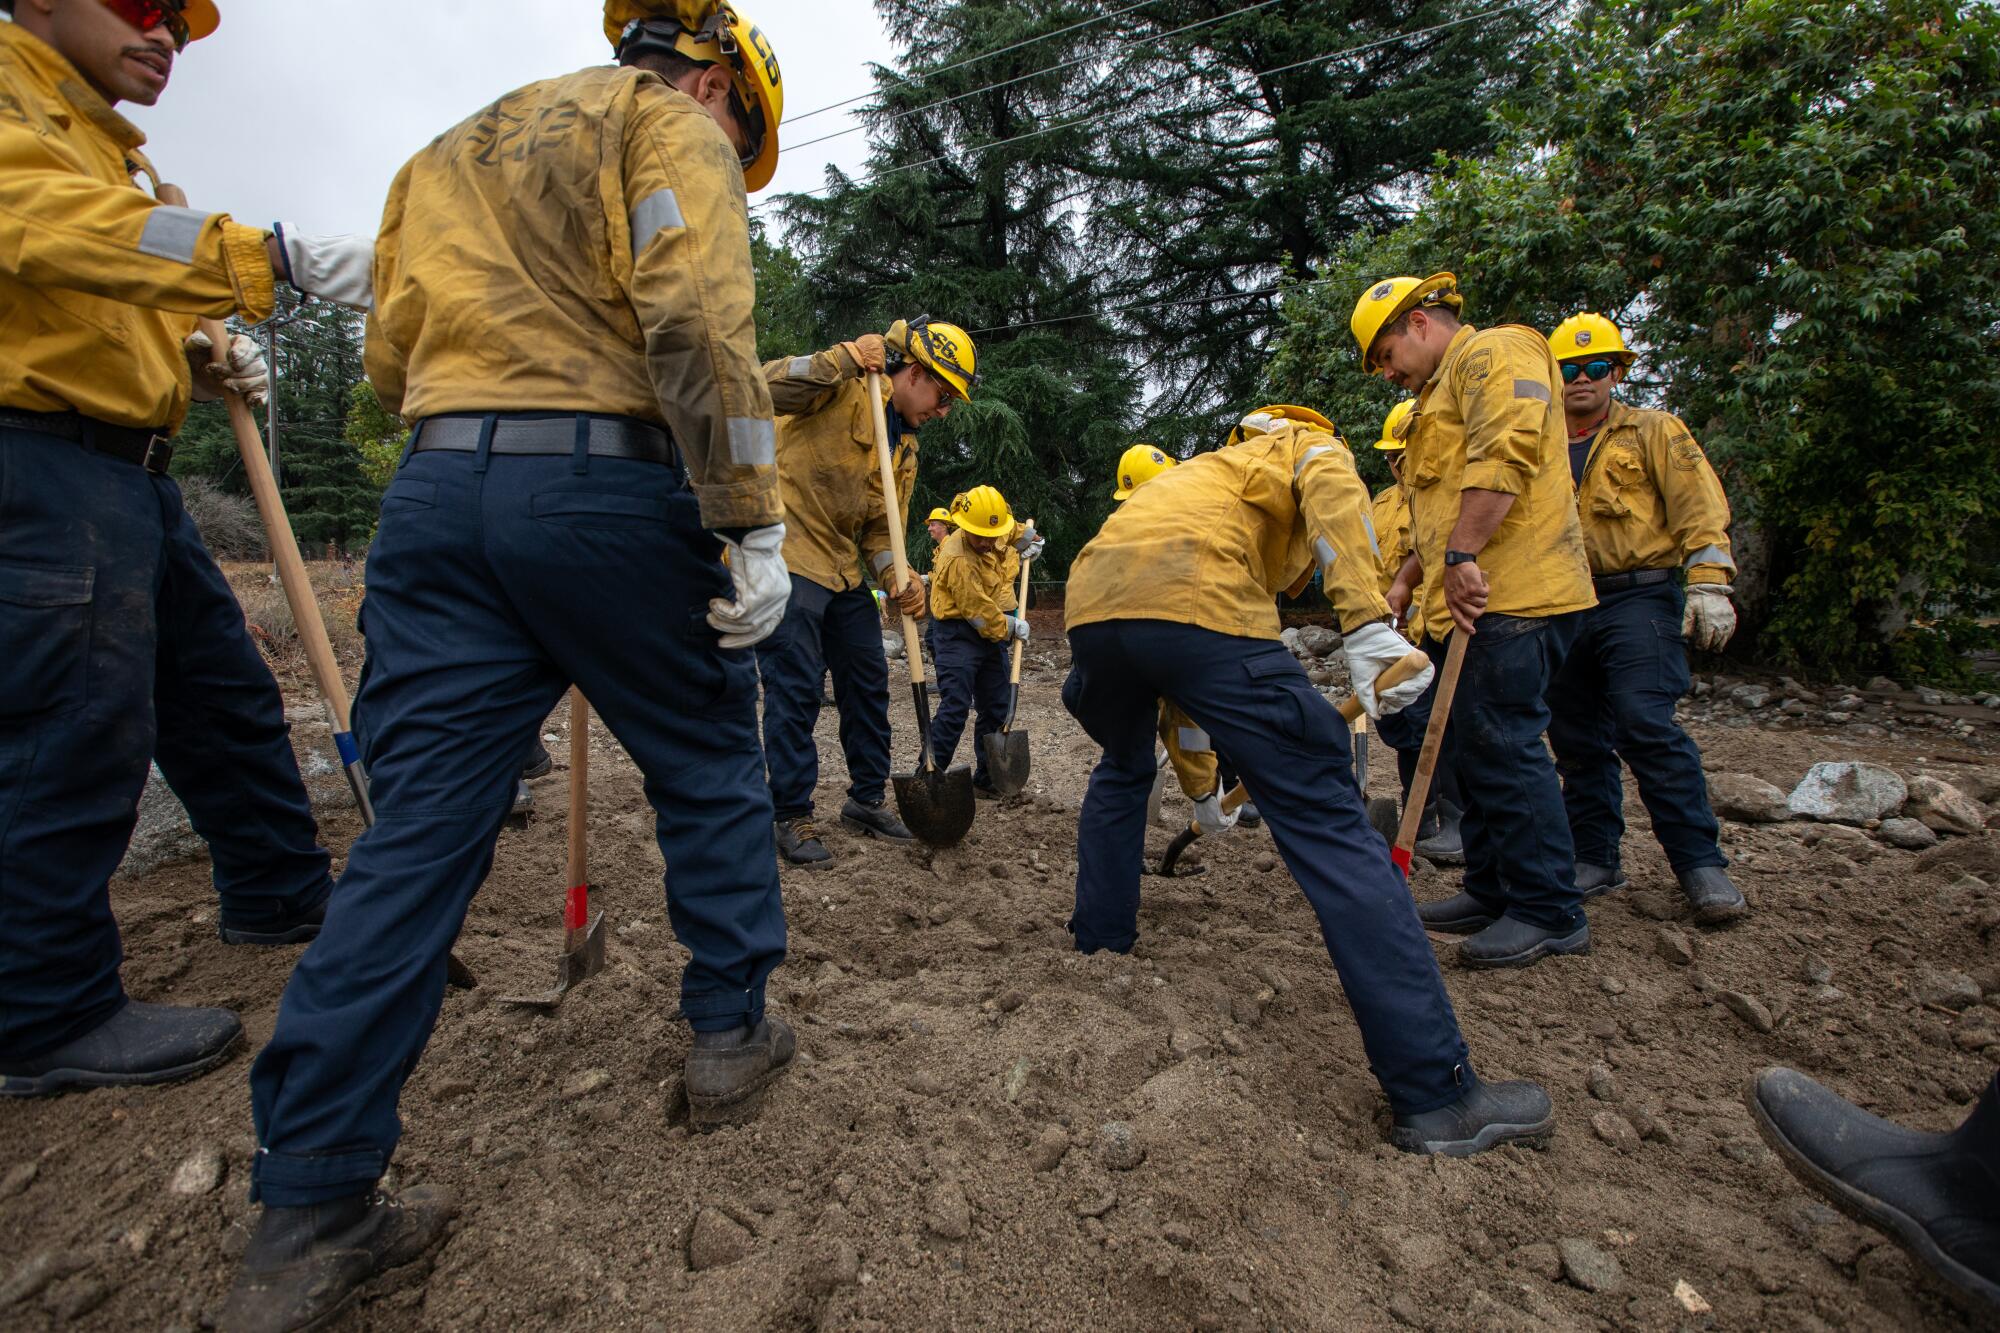 A group of men in blue pants, yellow shirts and hard hats shovel mud.